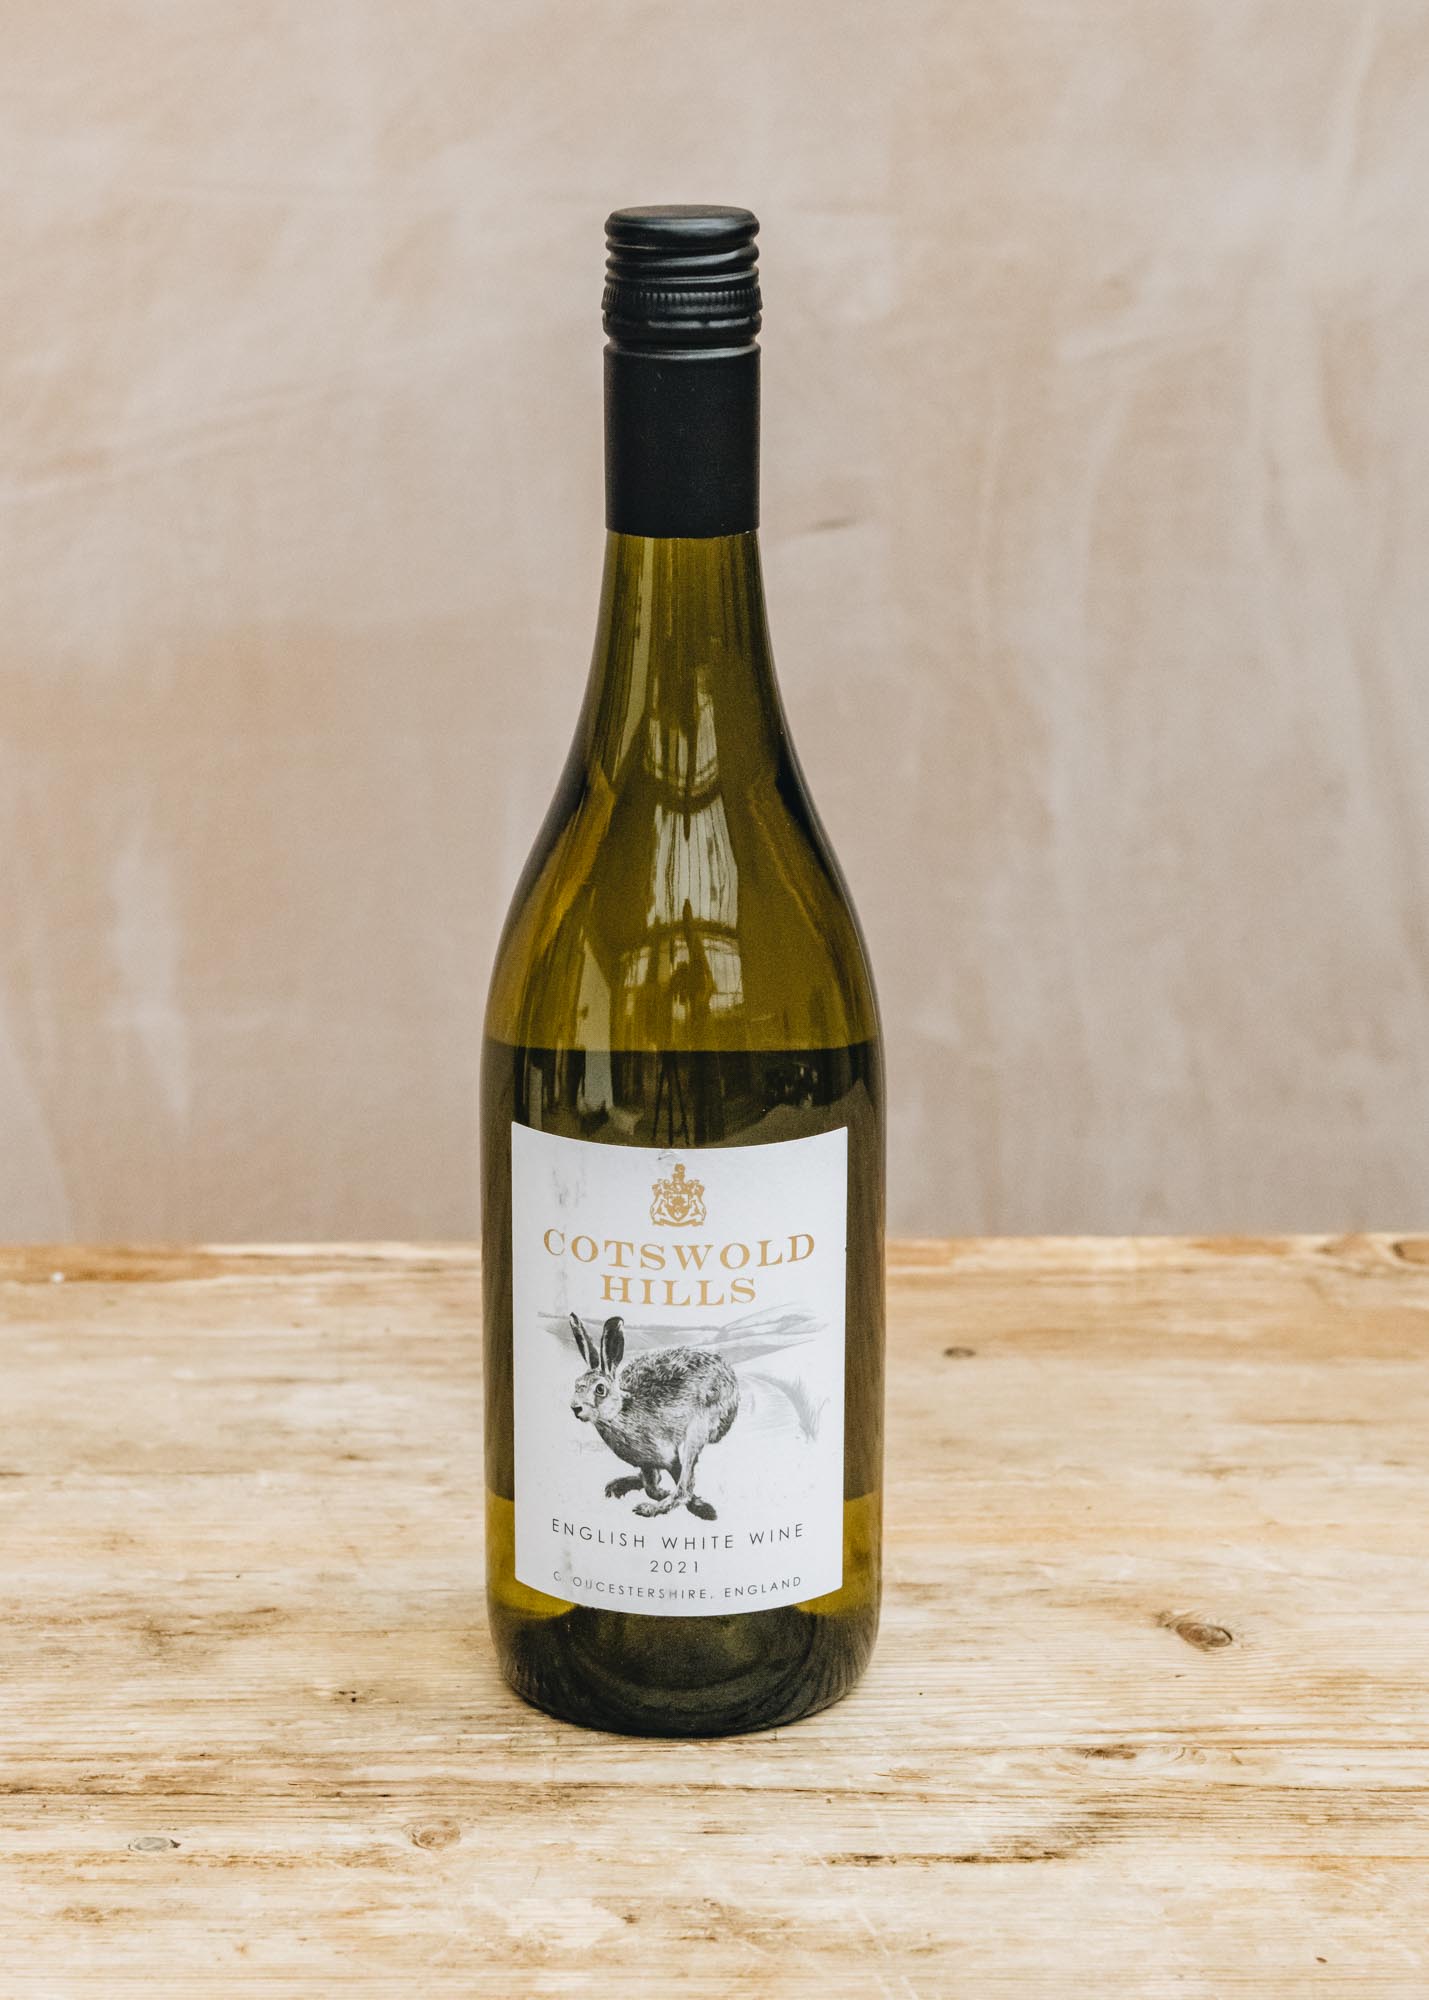 Cotswold Hills English White Wine, 75cl